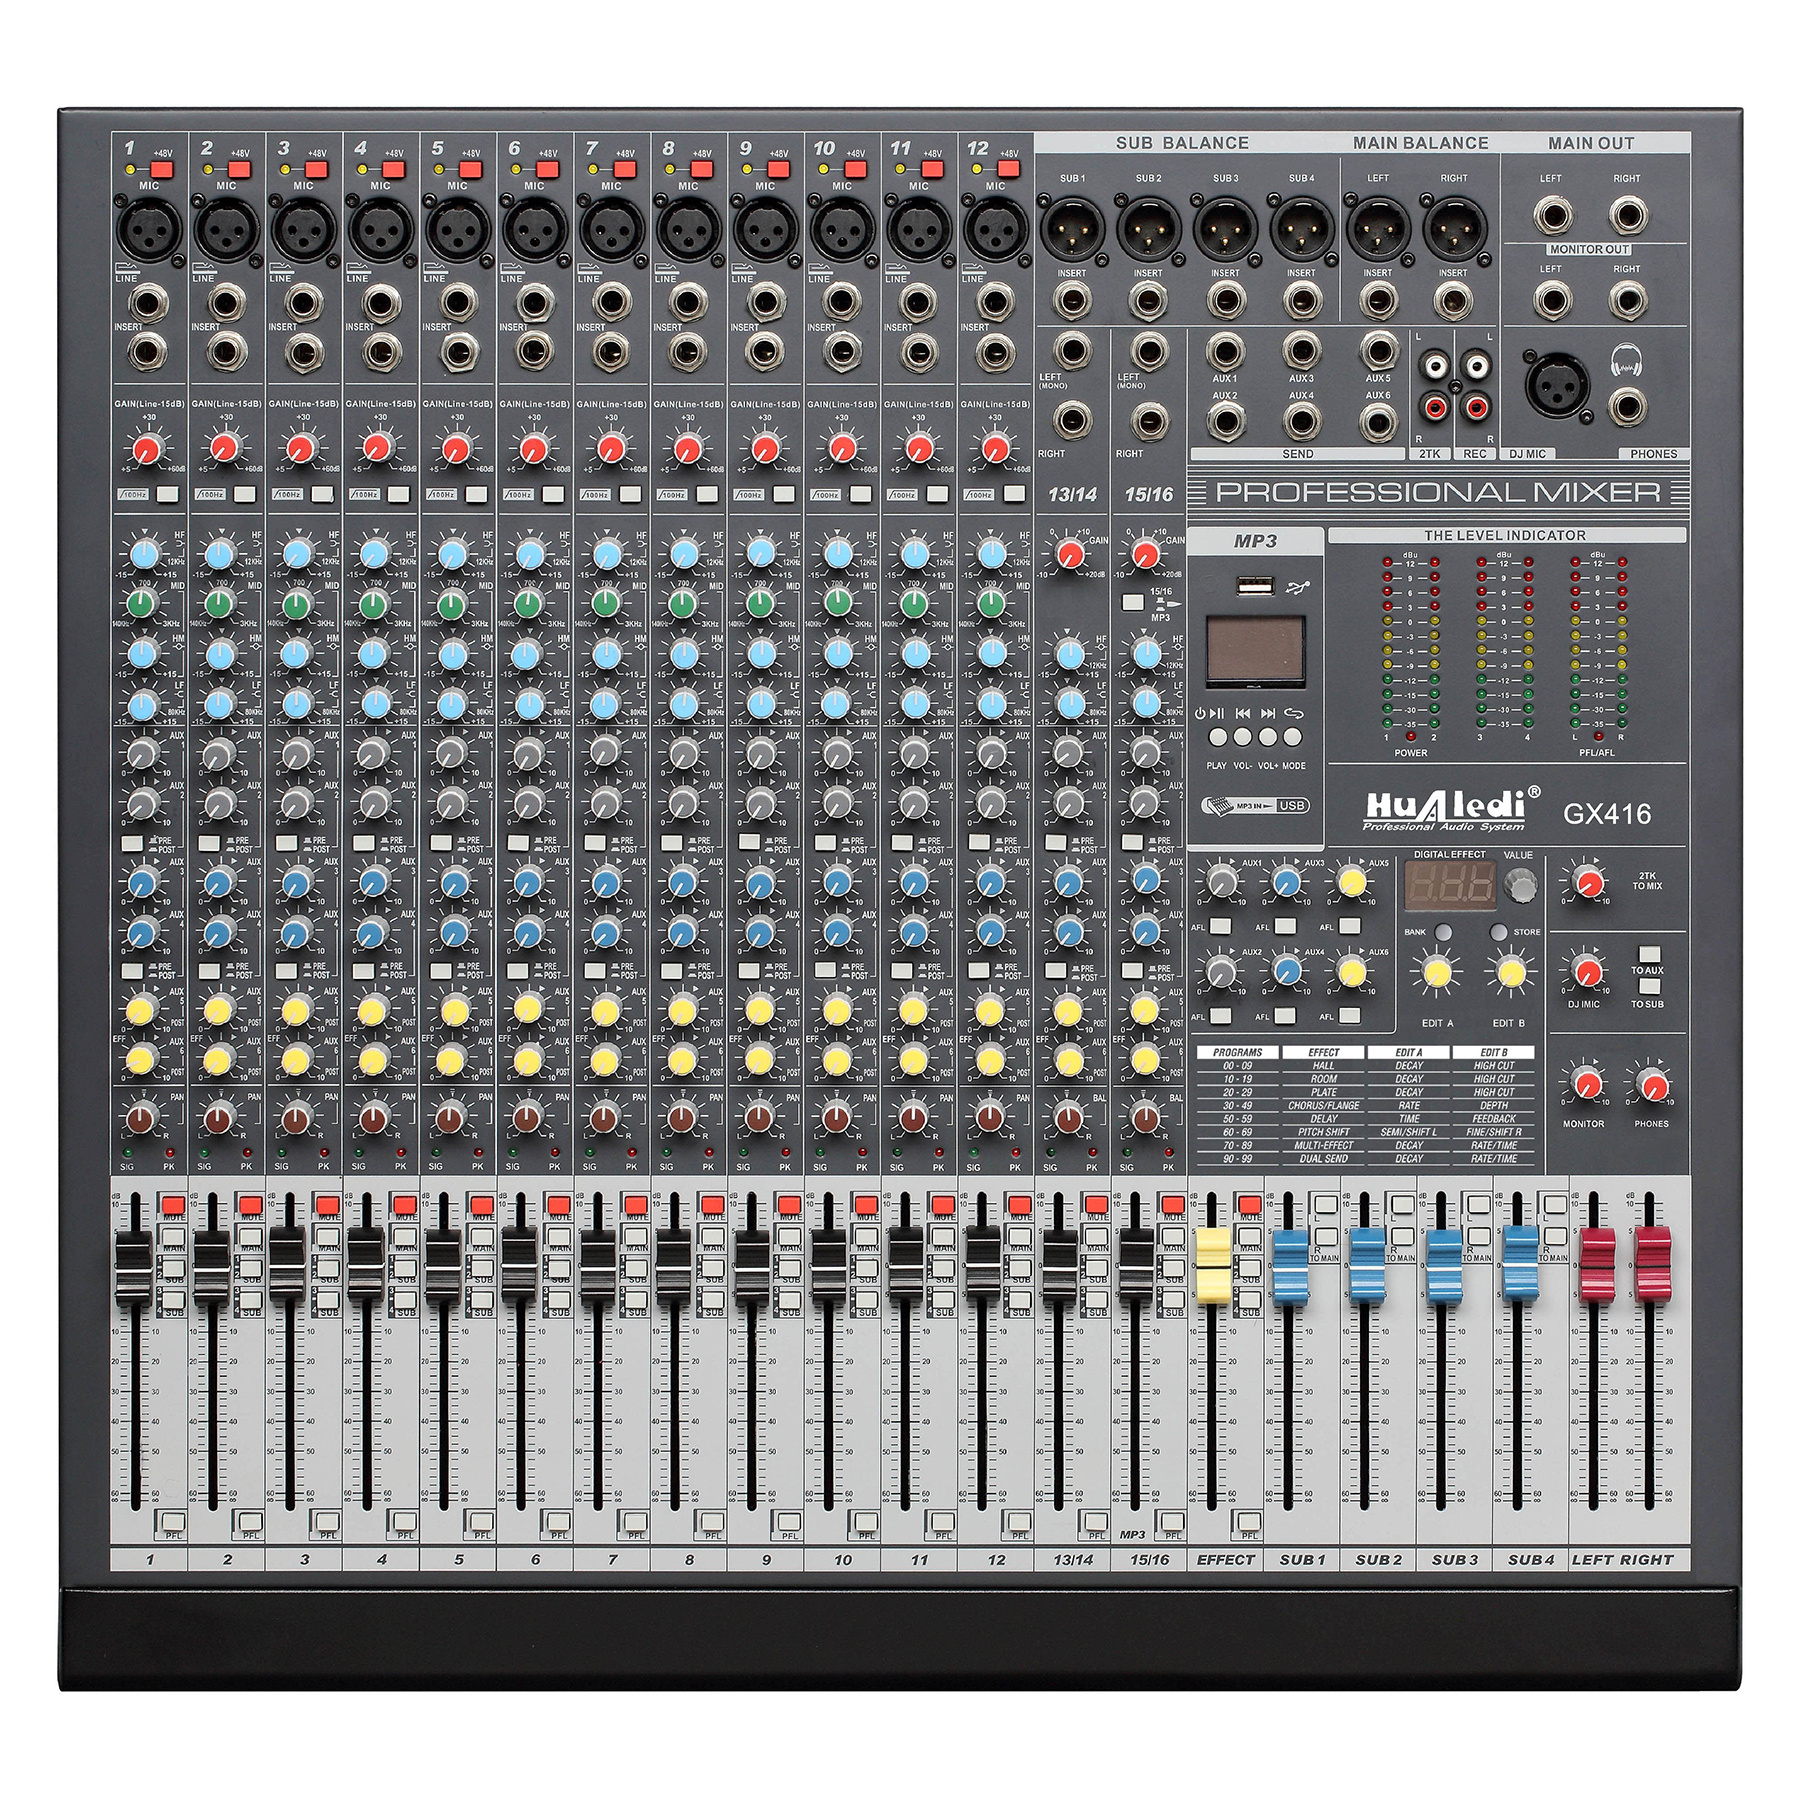 16 channels sound console family style -GX416